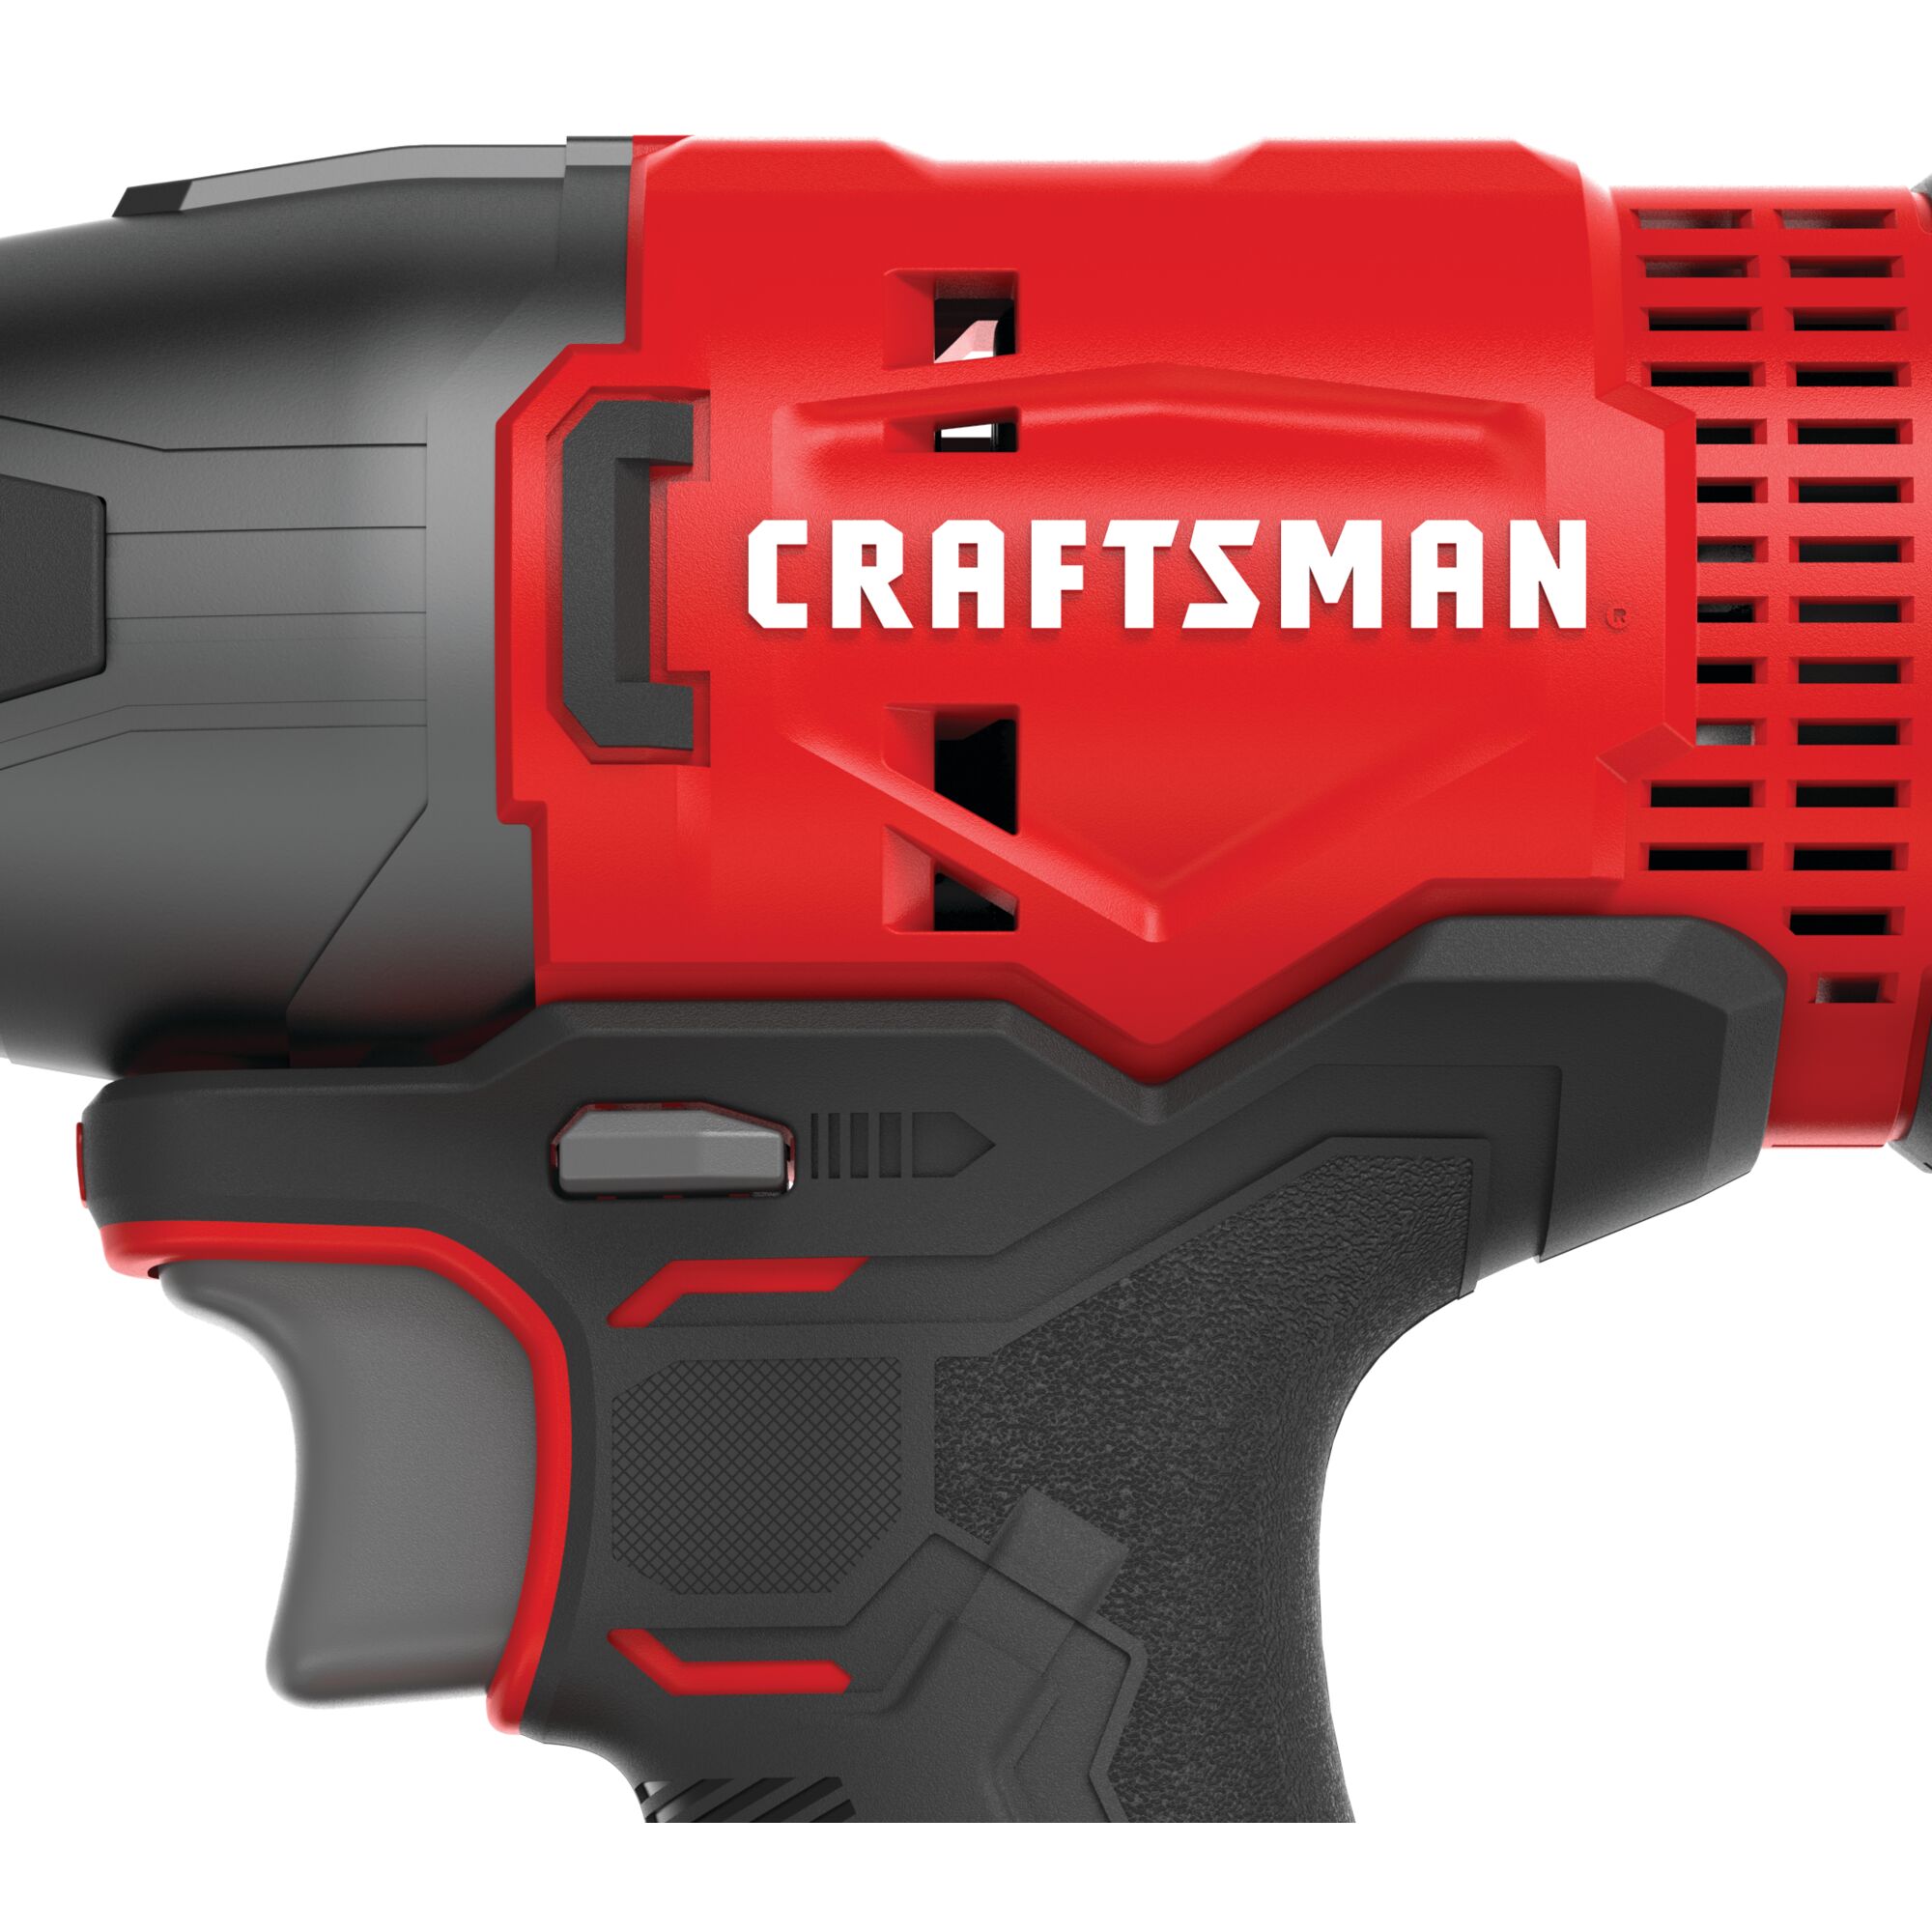 View of CRAFTSMAN Drills: Impact Driver highlighting product features